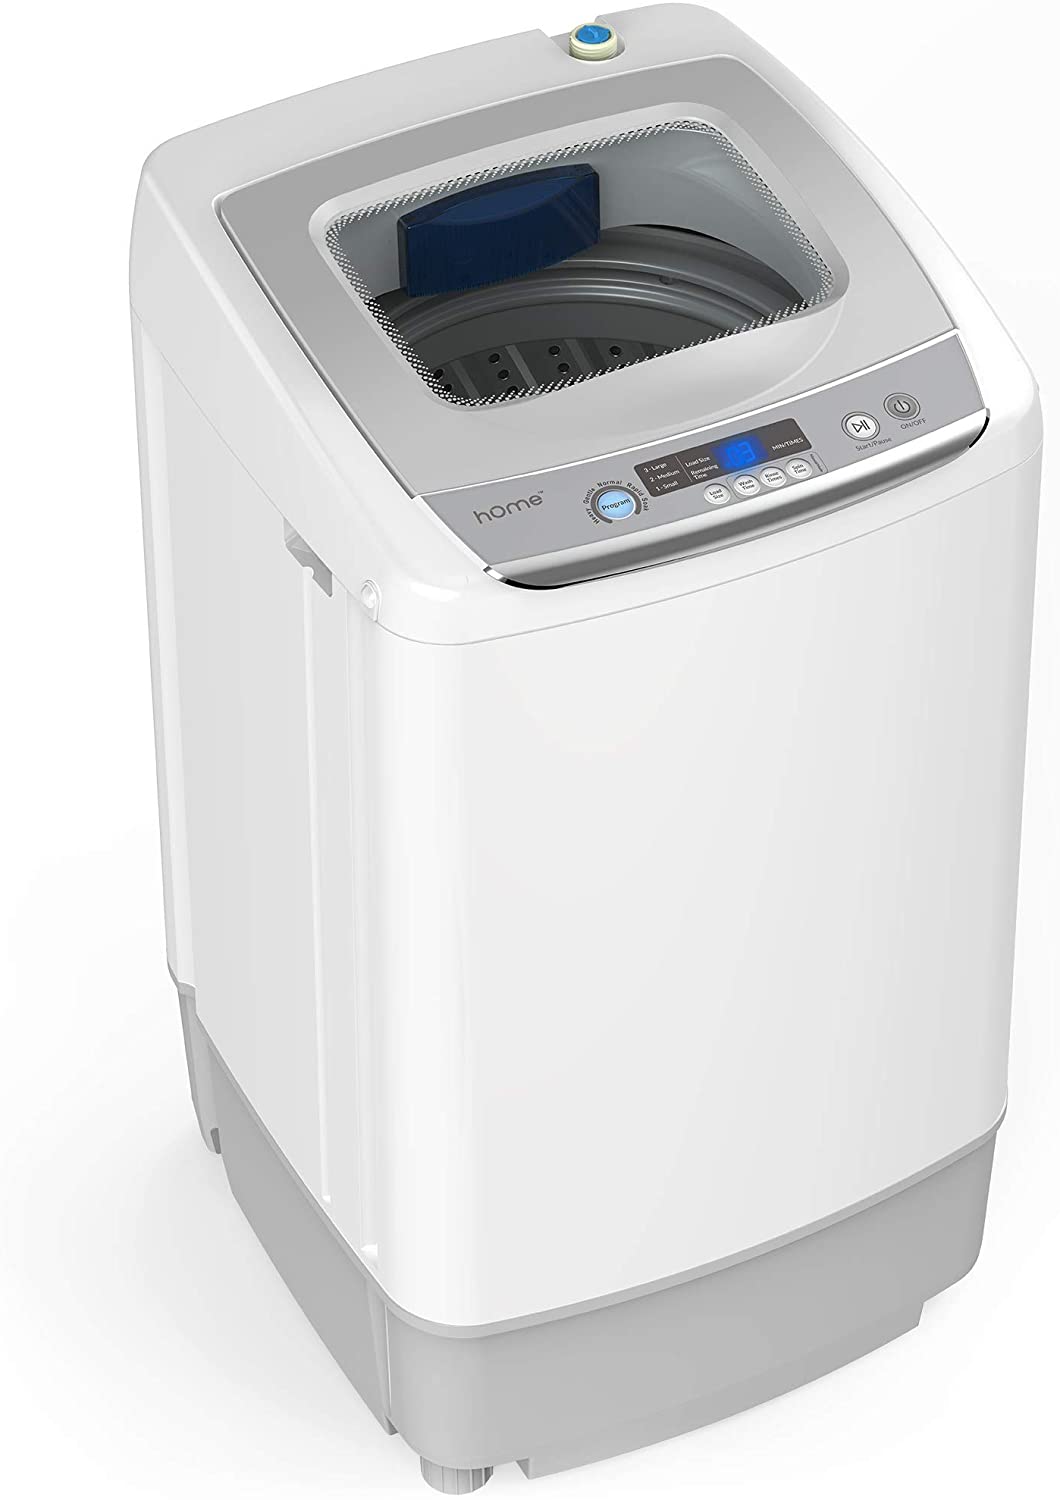 5 Most Reliable Top Load Washing Machine Best Portable Washer